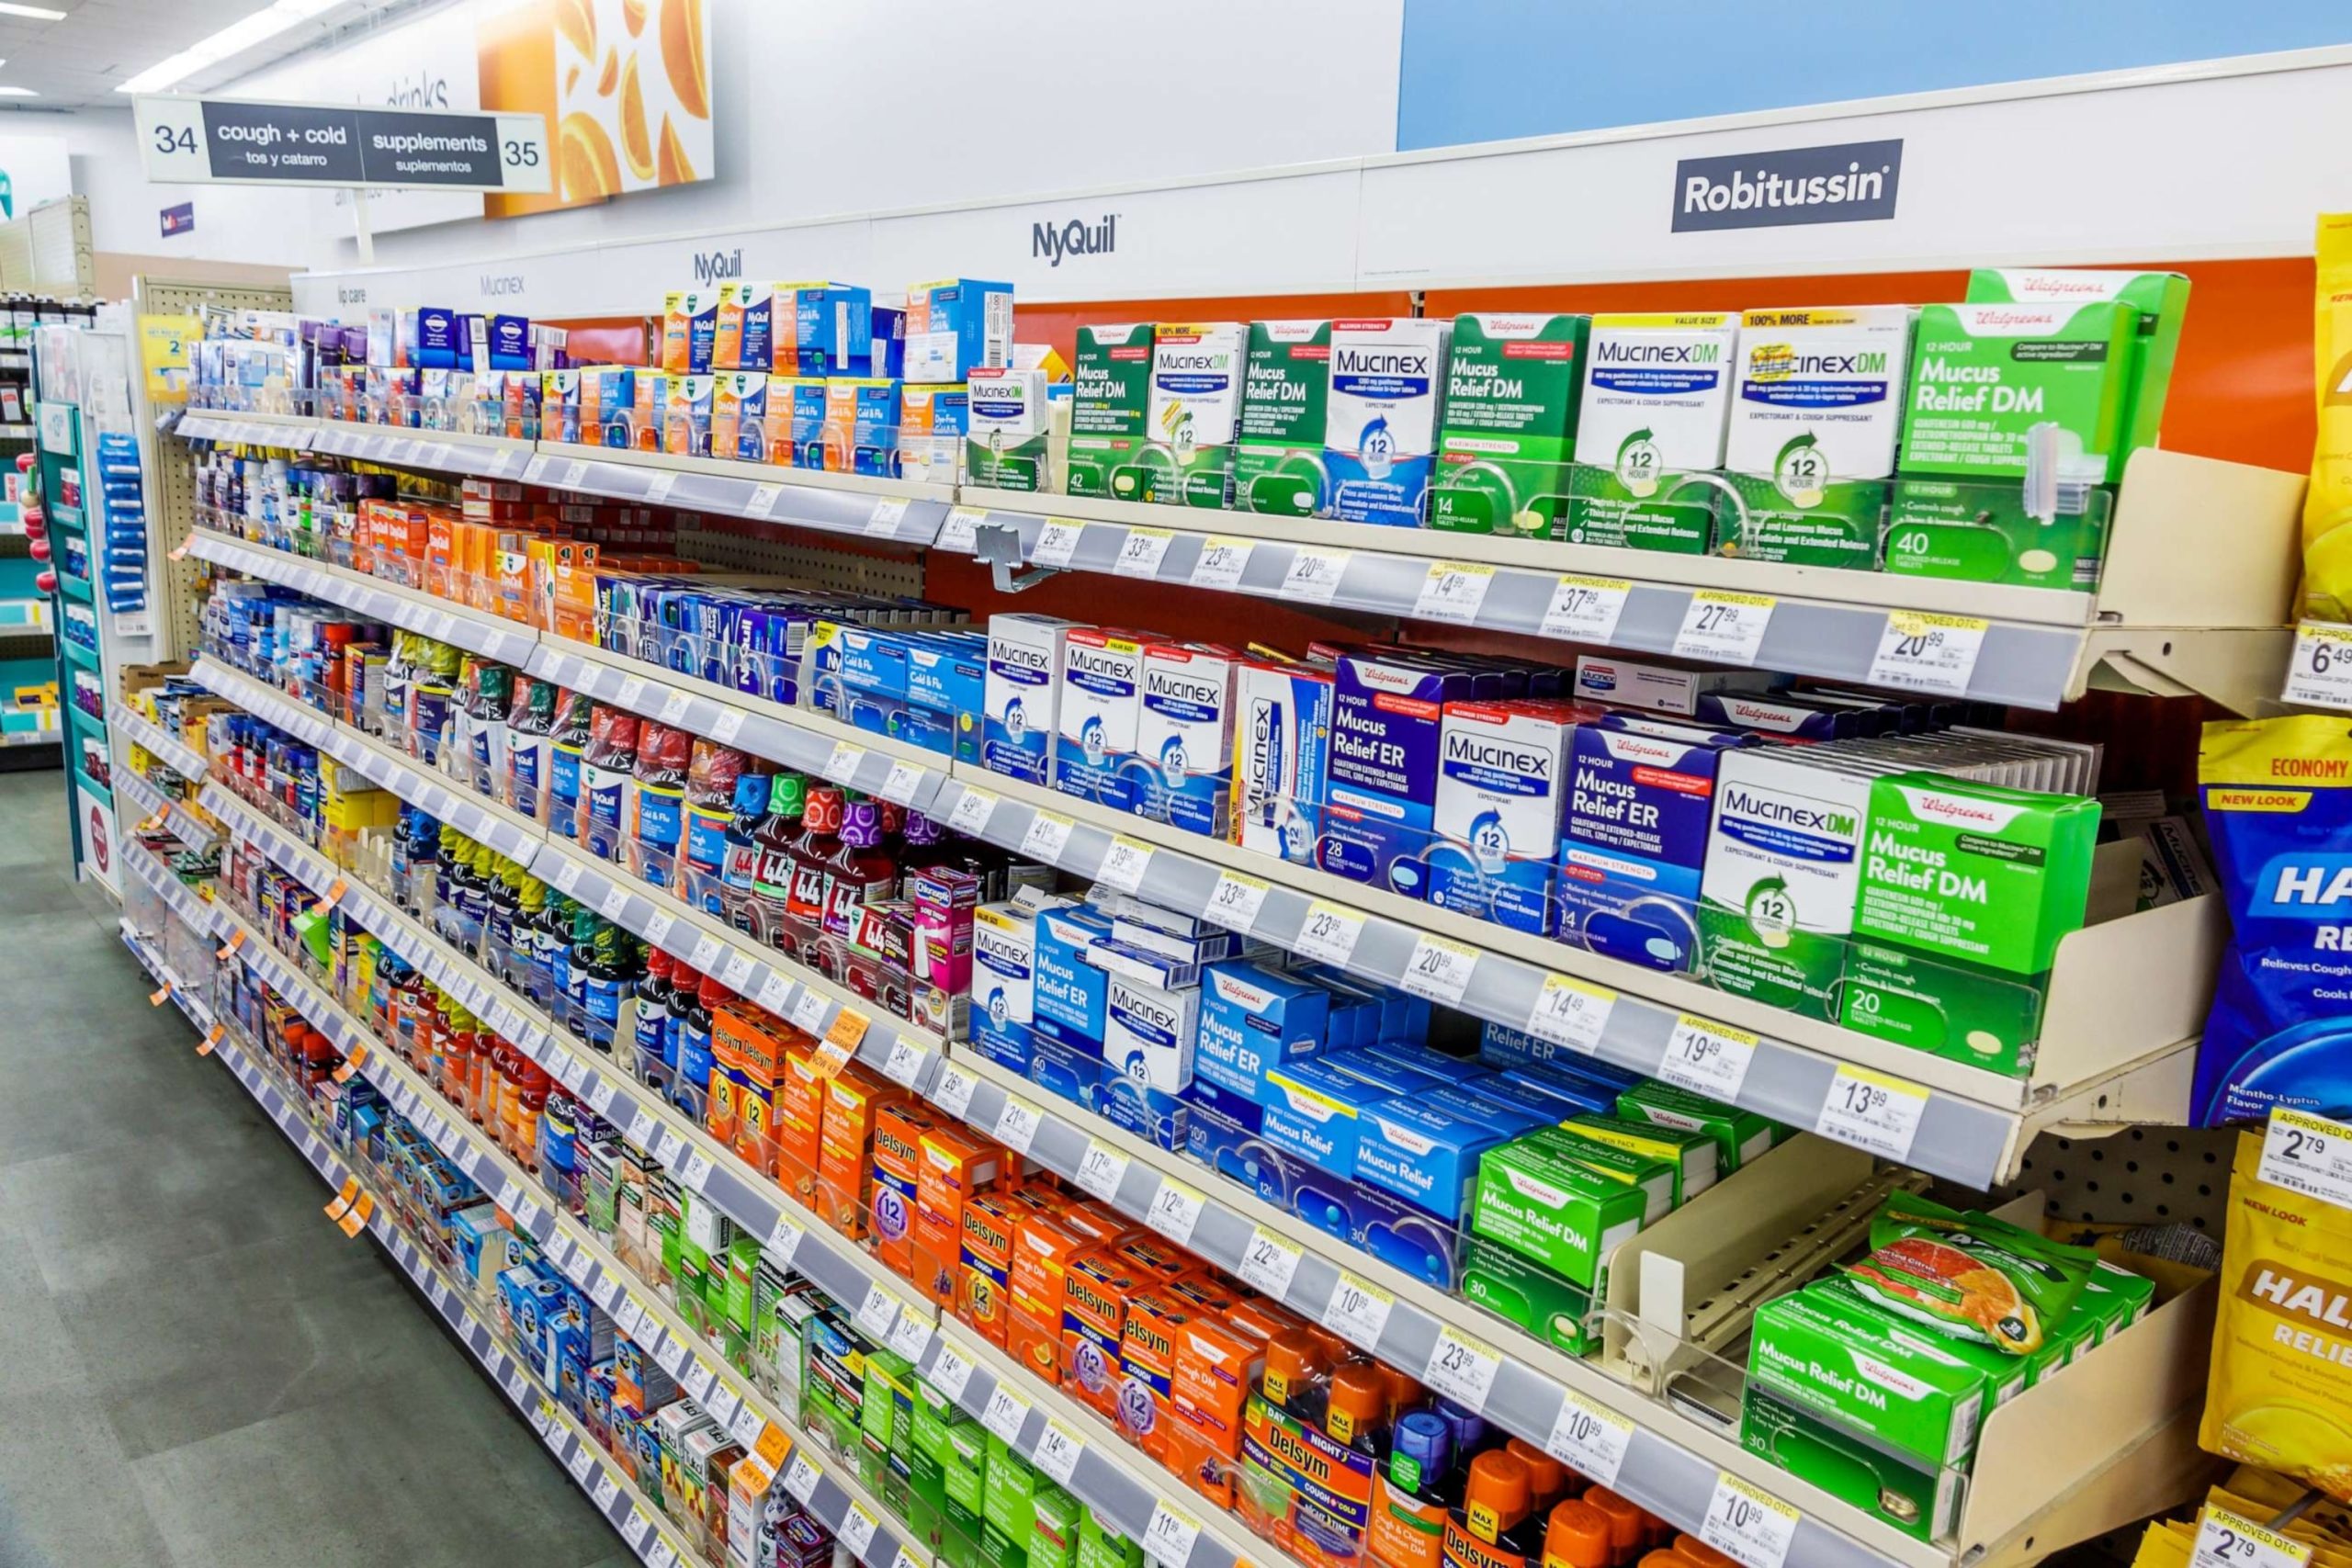 CVS responds to FDA panel's findings by removing ineffective decongestant from shelves